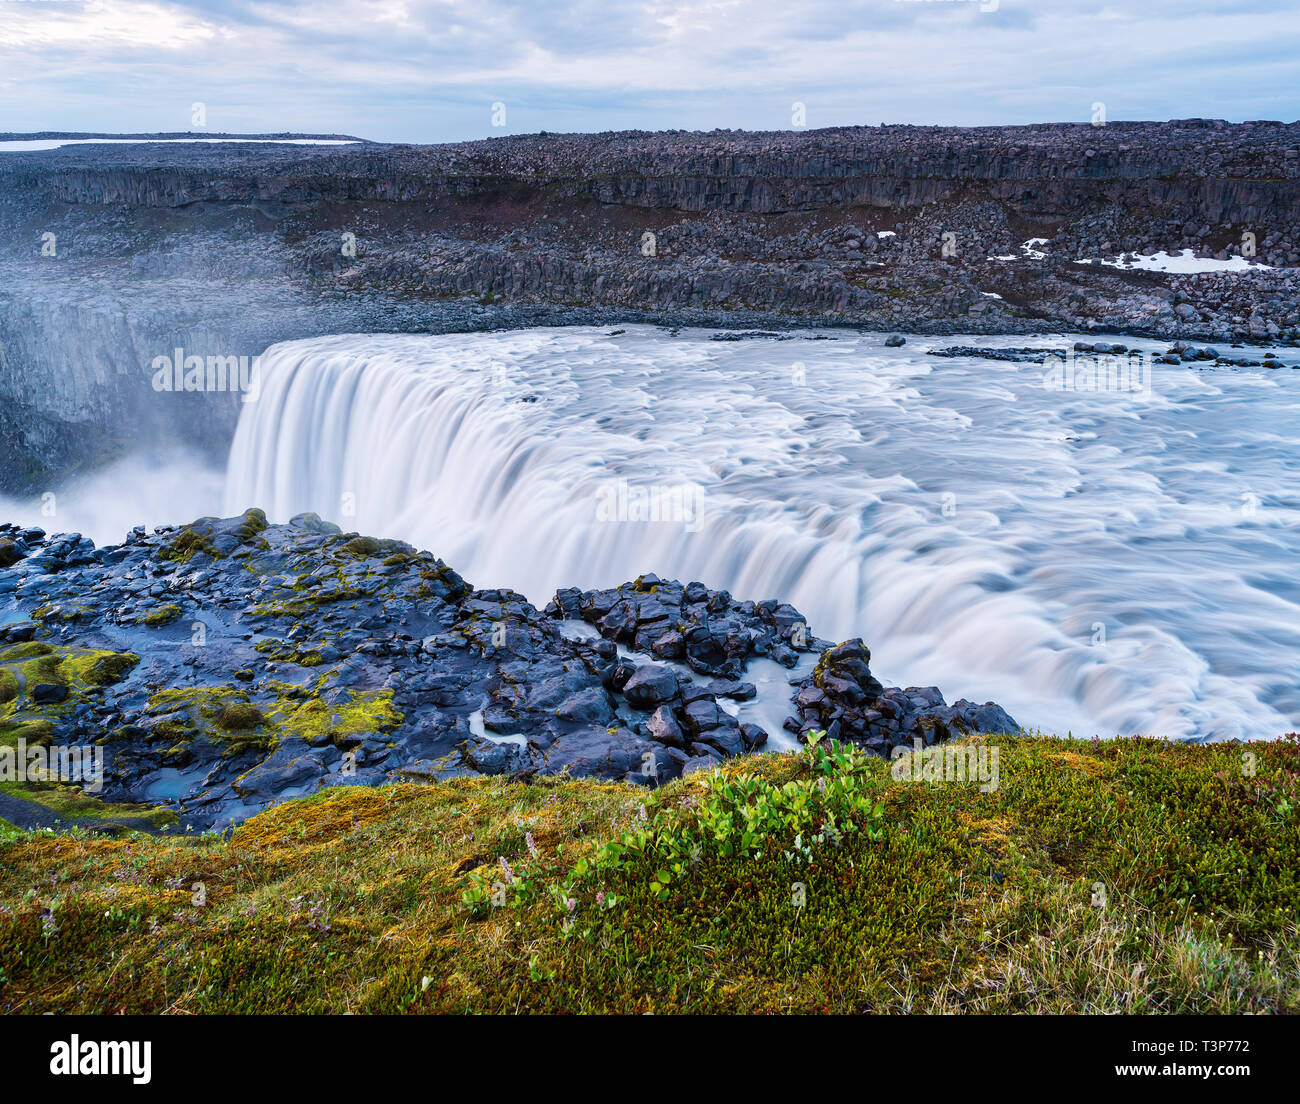 Dettifoss Waterfall, Iceland, Europe. Summer landscape with river and canyon. Famous Tourist Attraction. Cloudy morning. Beauty in nature Stock Photo